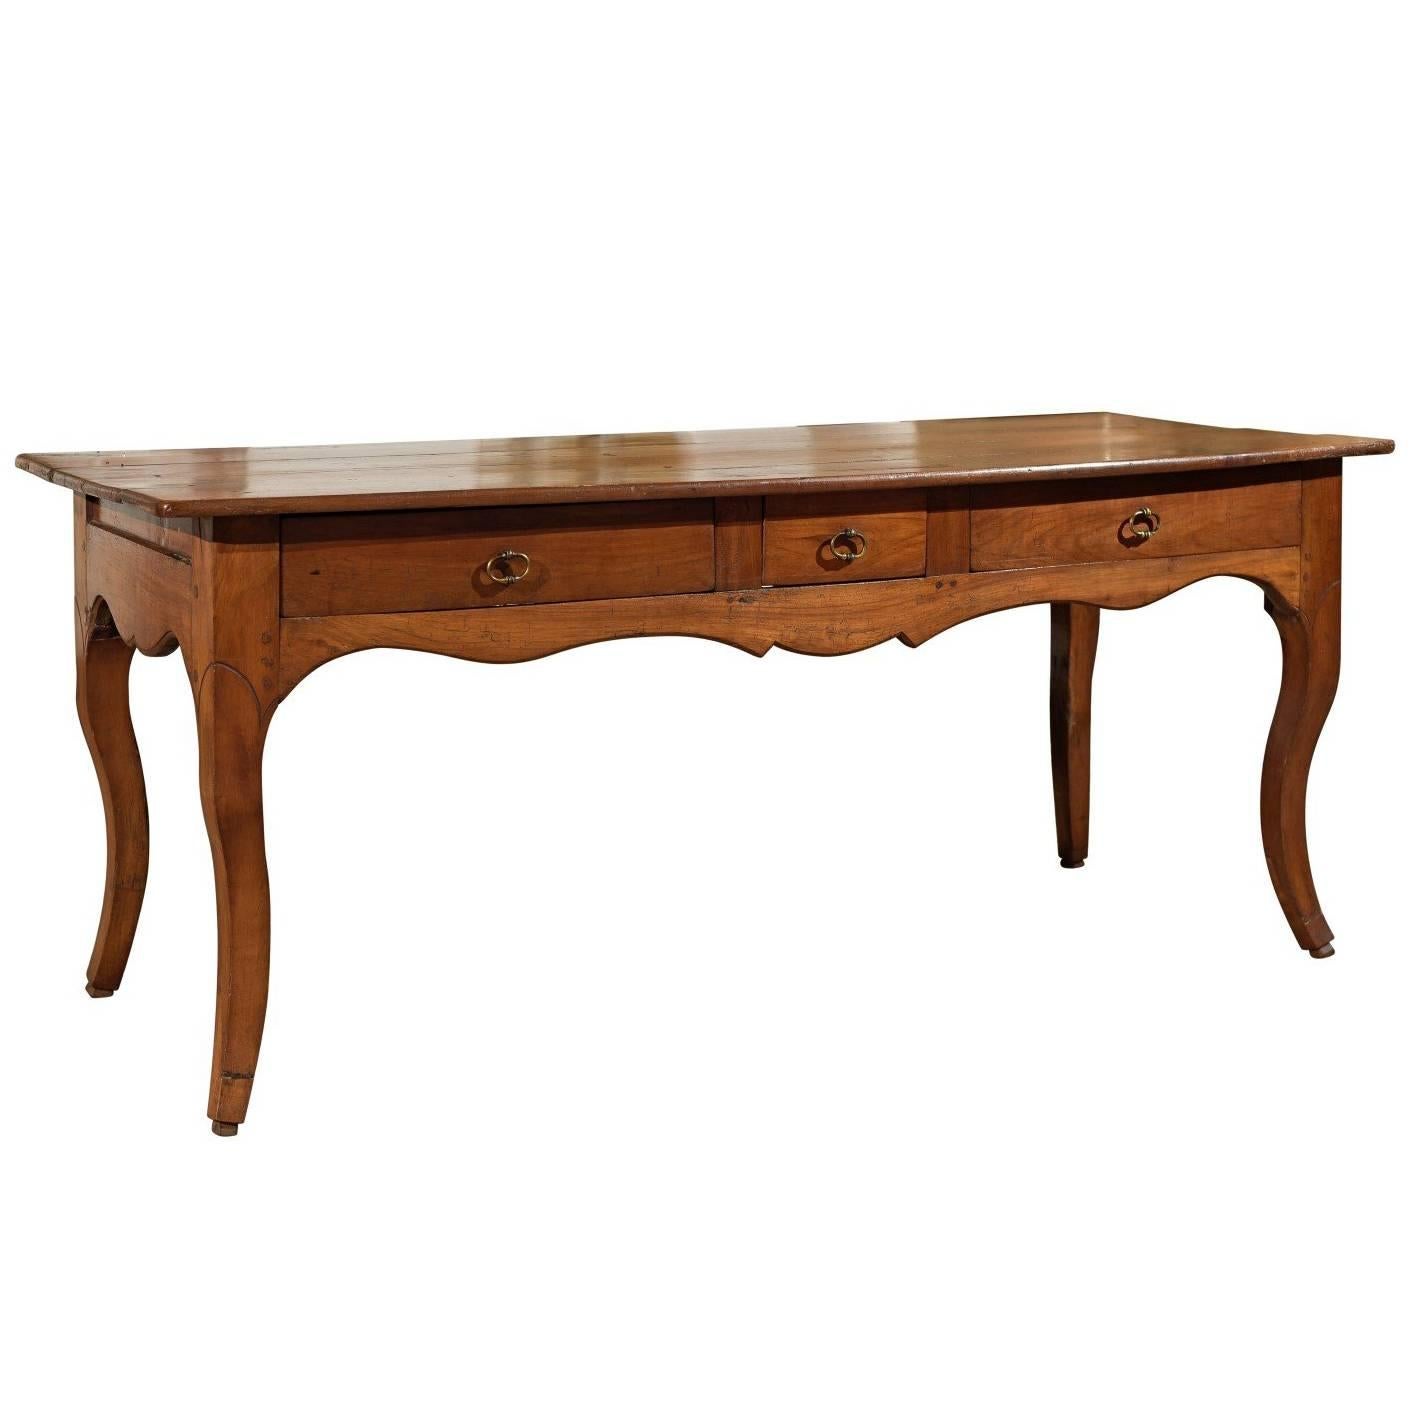 19th Century Louis XV Style Cherry Server with Three Drawers, circa 1800 For Sale